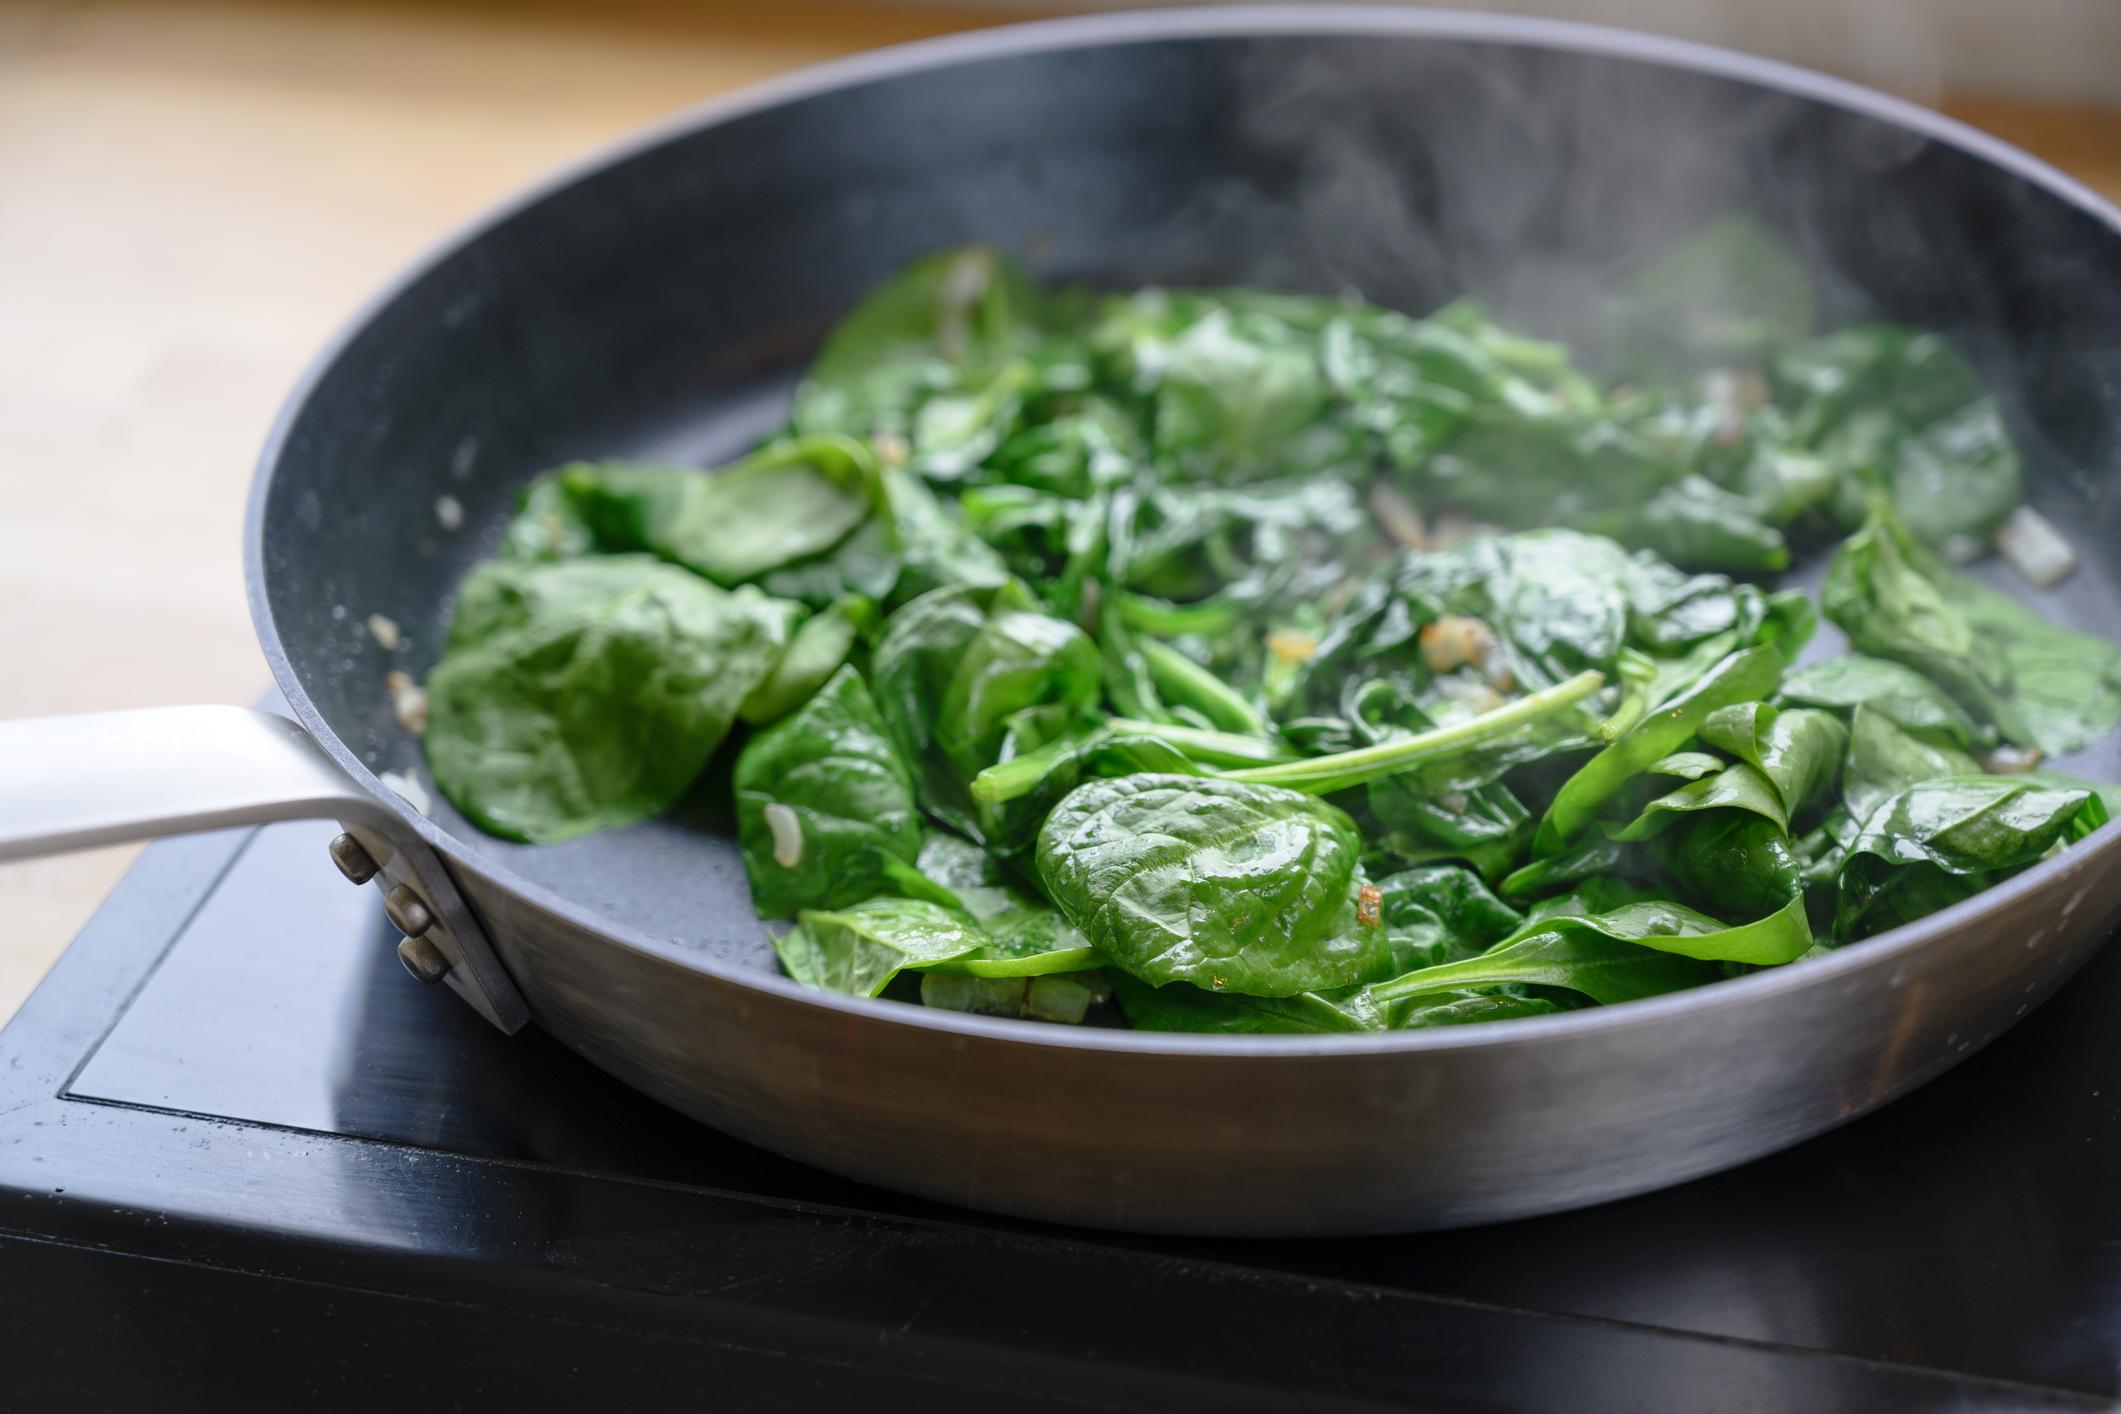 What are the health benefits of spinach?